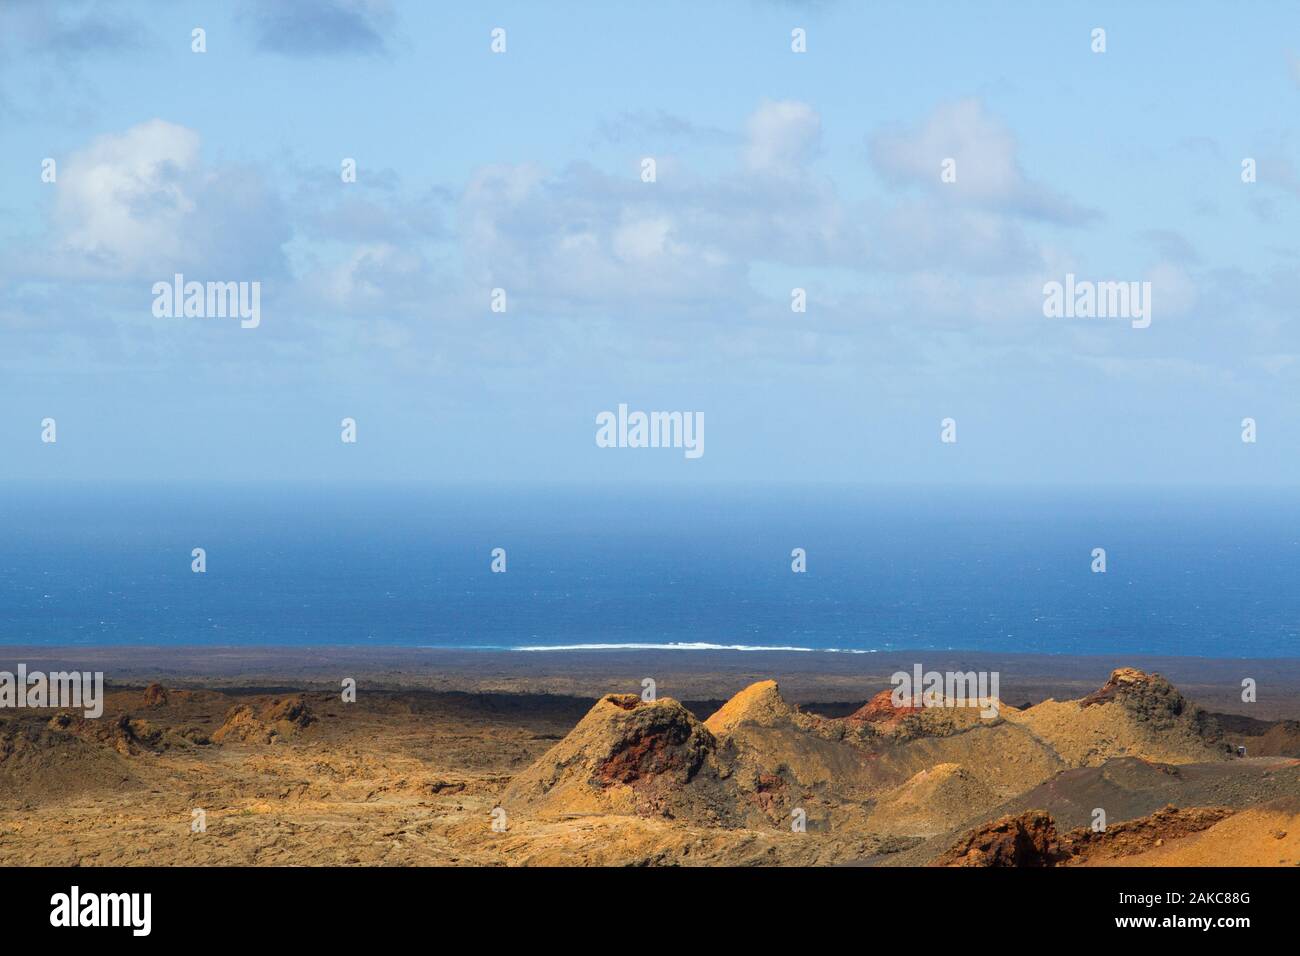 Timanfaya National Park (Volcanic Natural Park) on Lanzarote Island, Canary, Spain. Stock Photo